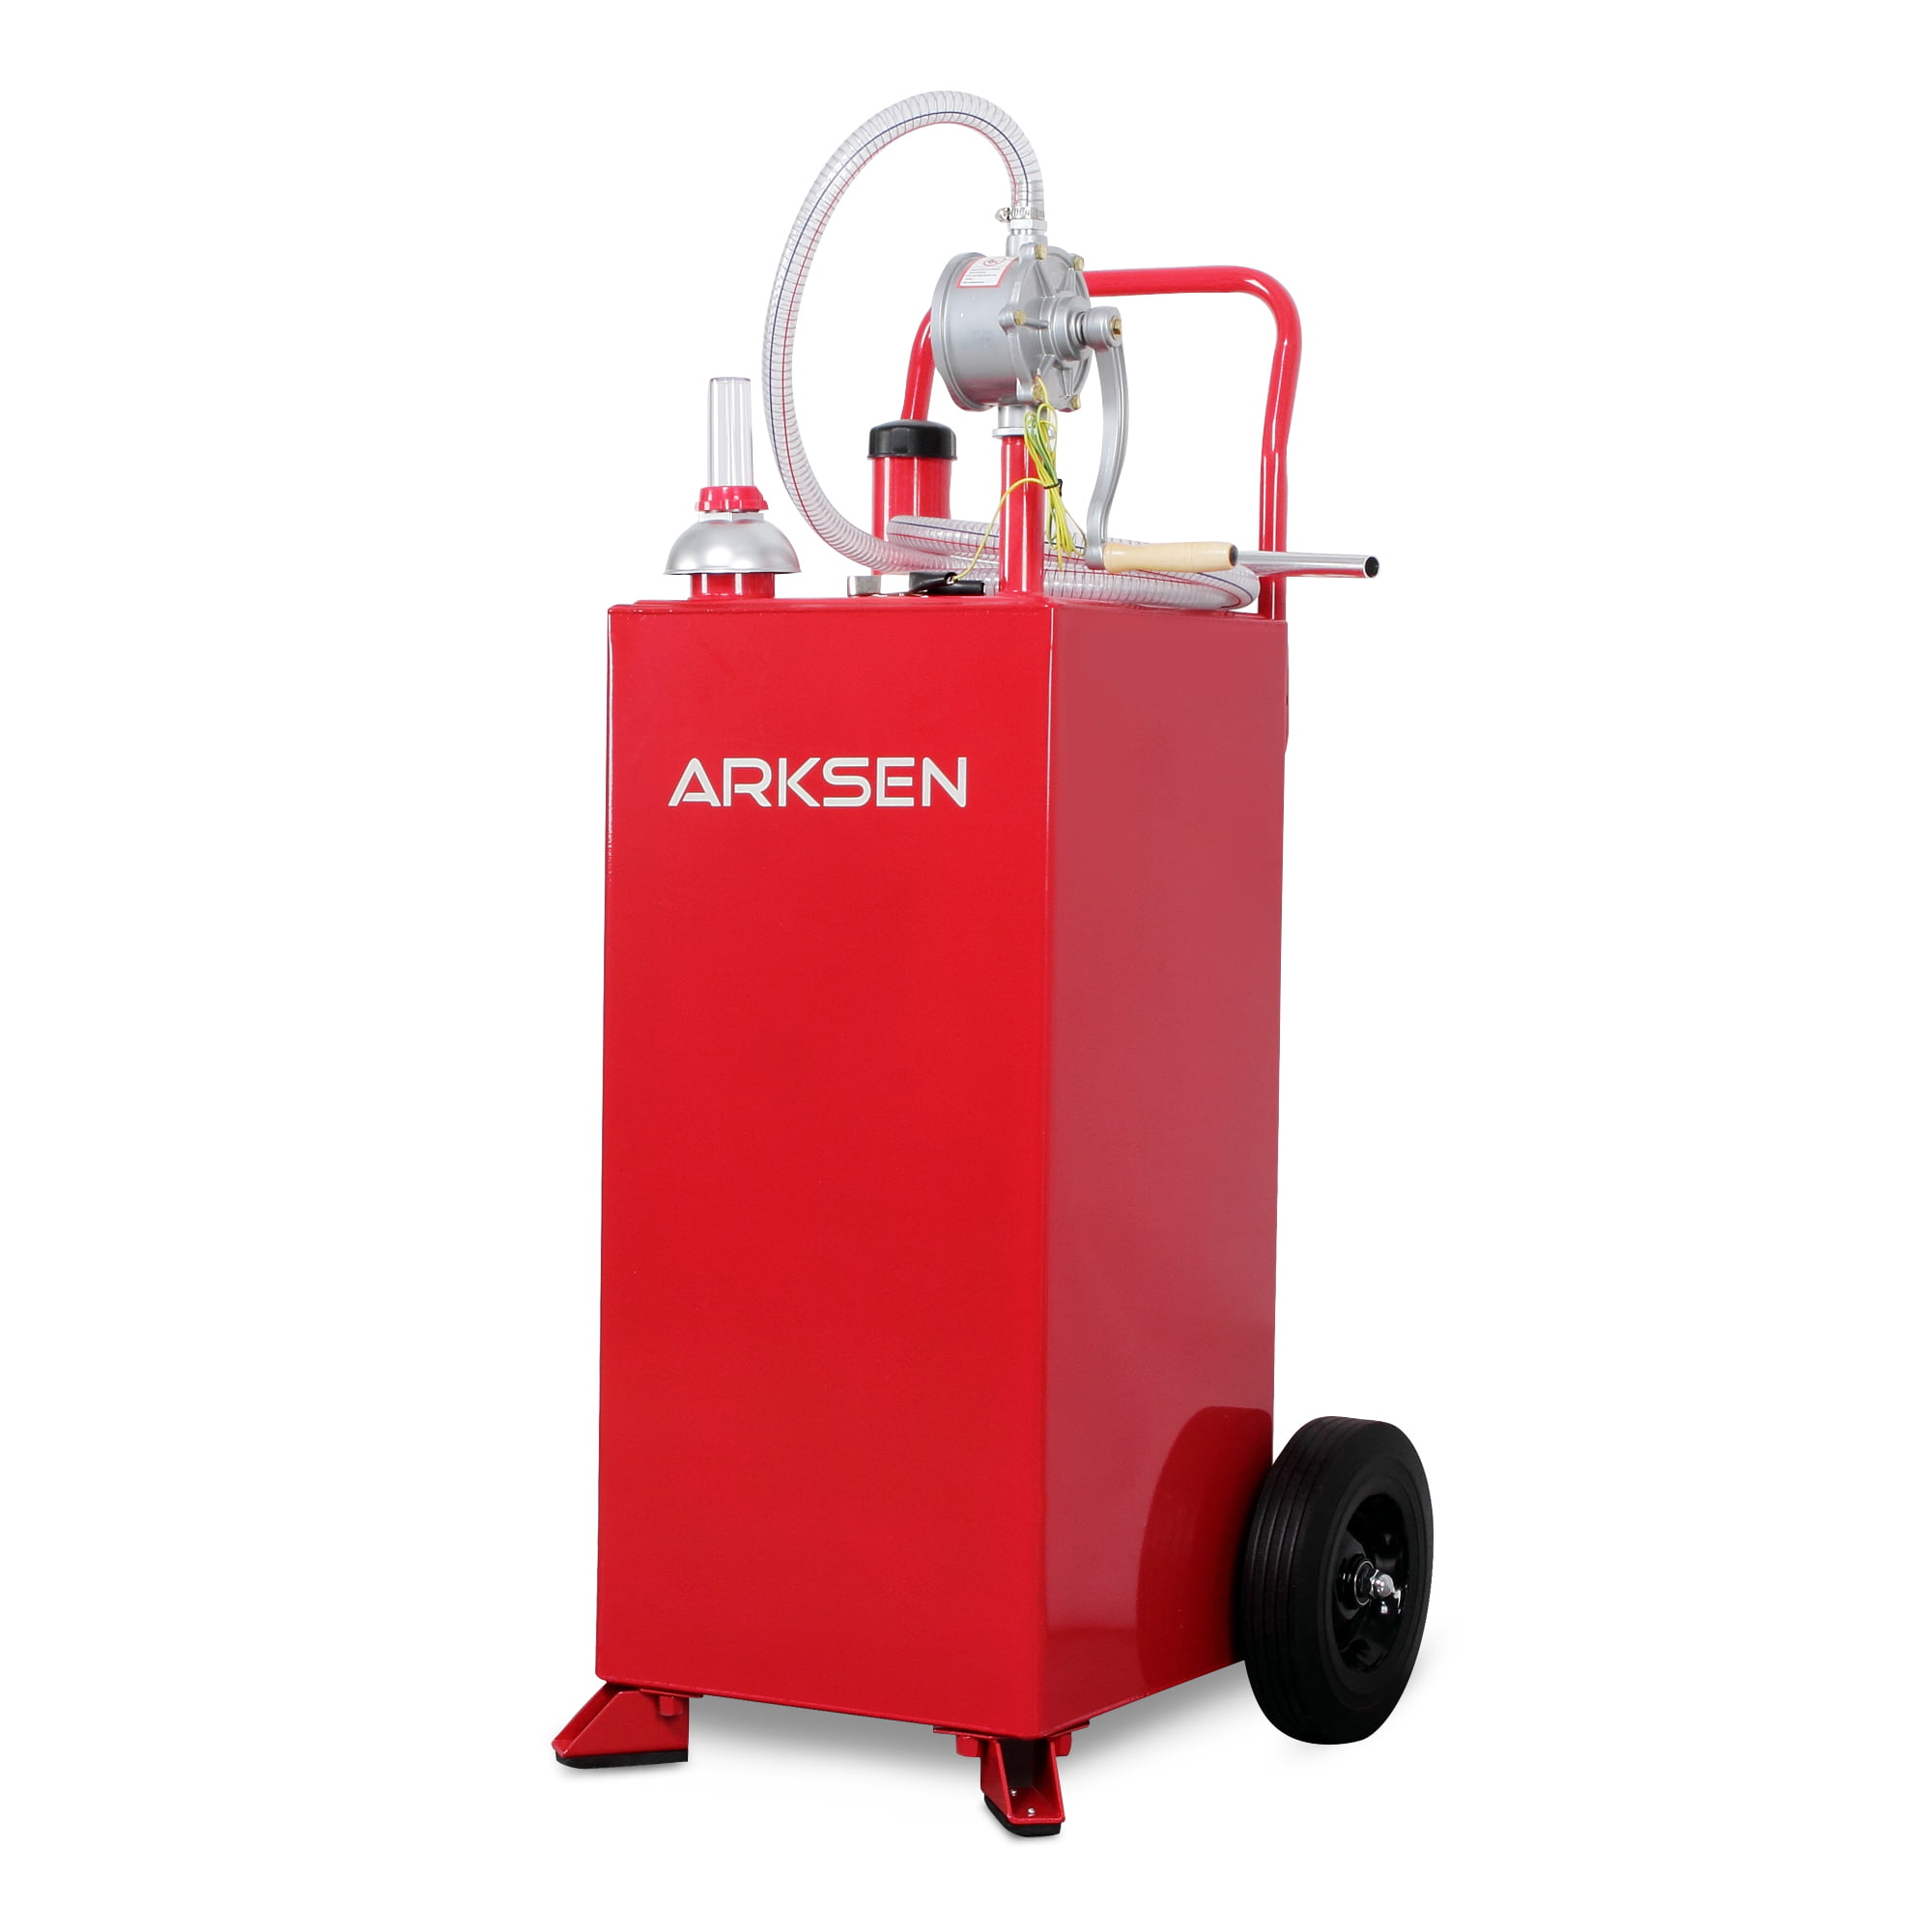 Arksen 30 Gallon Portable Fuel Transfer Gas Can Caddy Storage Tank - Red - ...